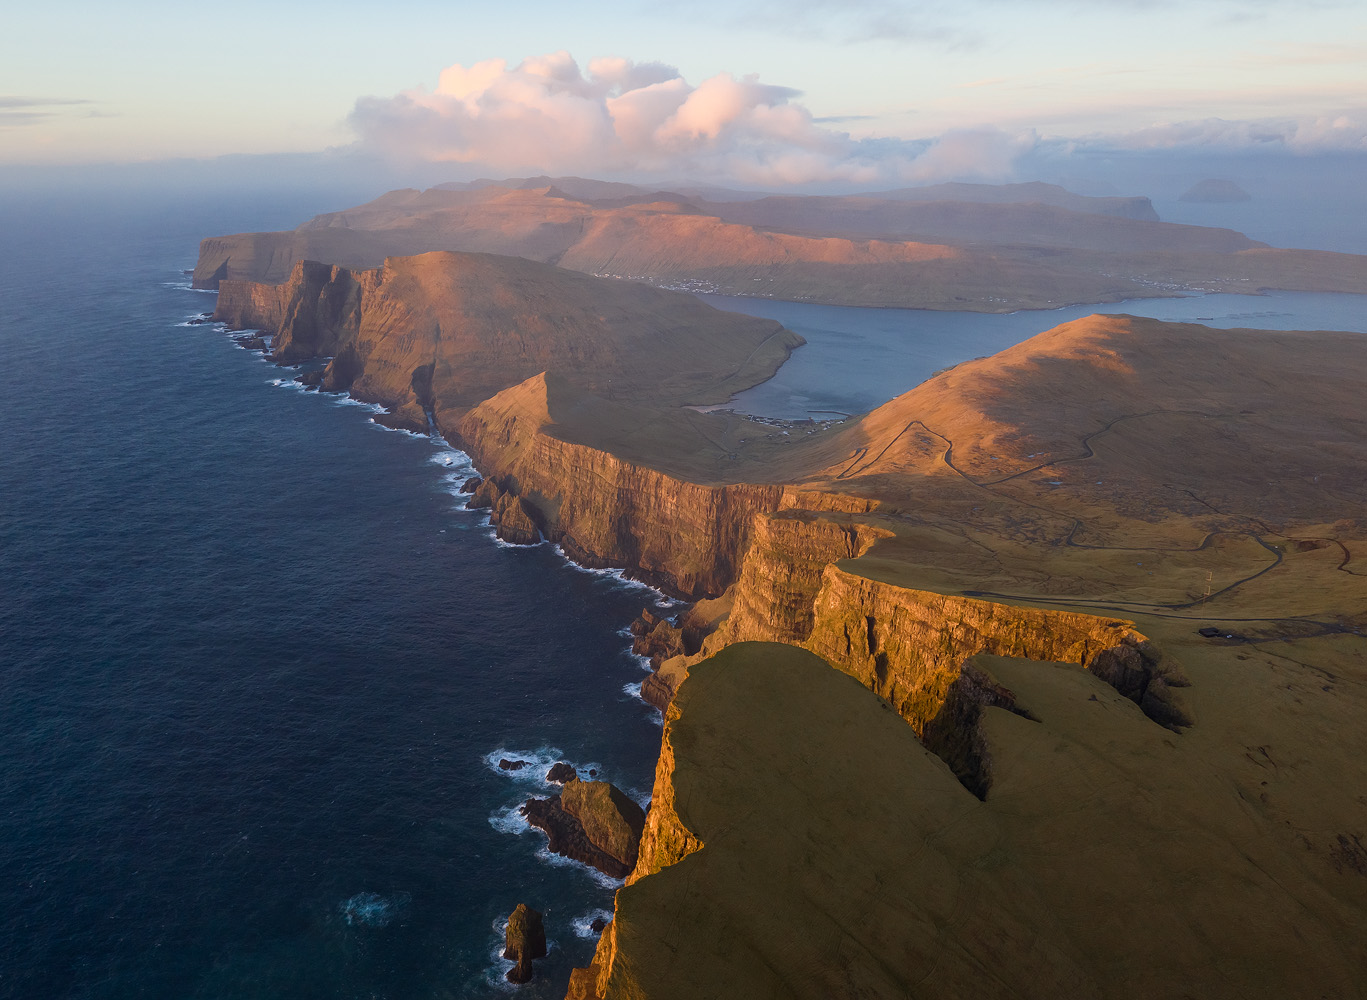 Afternoon light on the magnificent cliffs of Suðuroy. I flew the drone in the harsh winds typical to the Faroes, and as a result, the battery drained so fast I only had 10 or 15 minutes to shoot. </br>DJI Mavic II Pro, 1/80 sec, F5.6, ISO 200. Suðuroy, the Faroe Islands